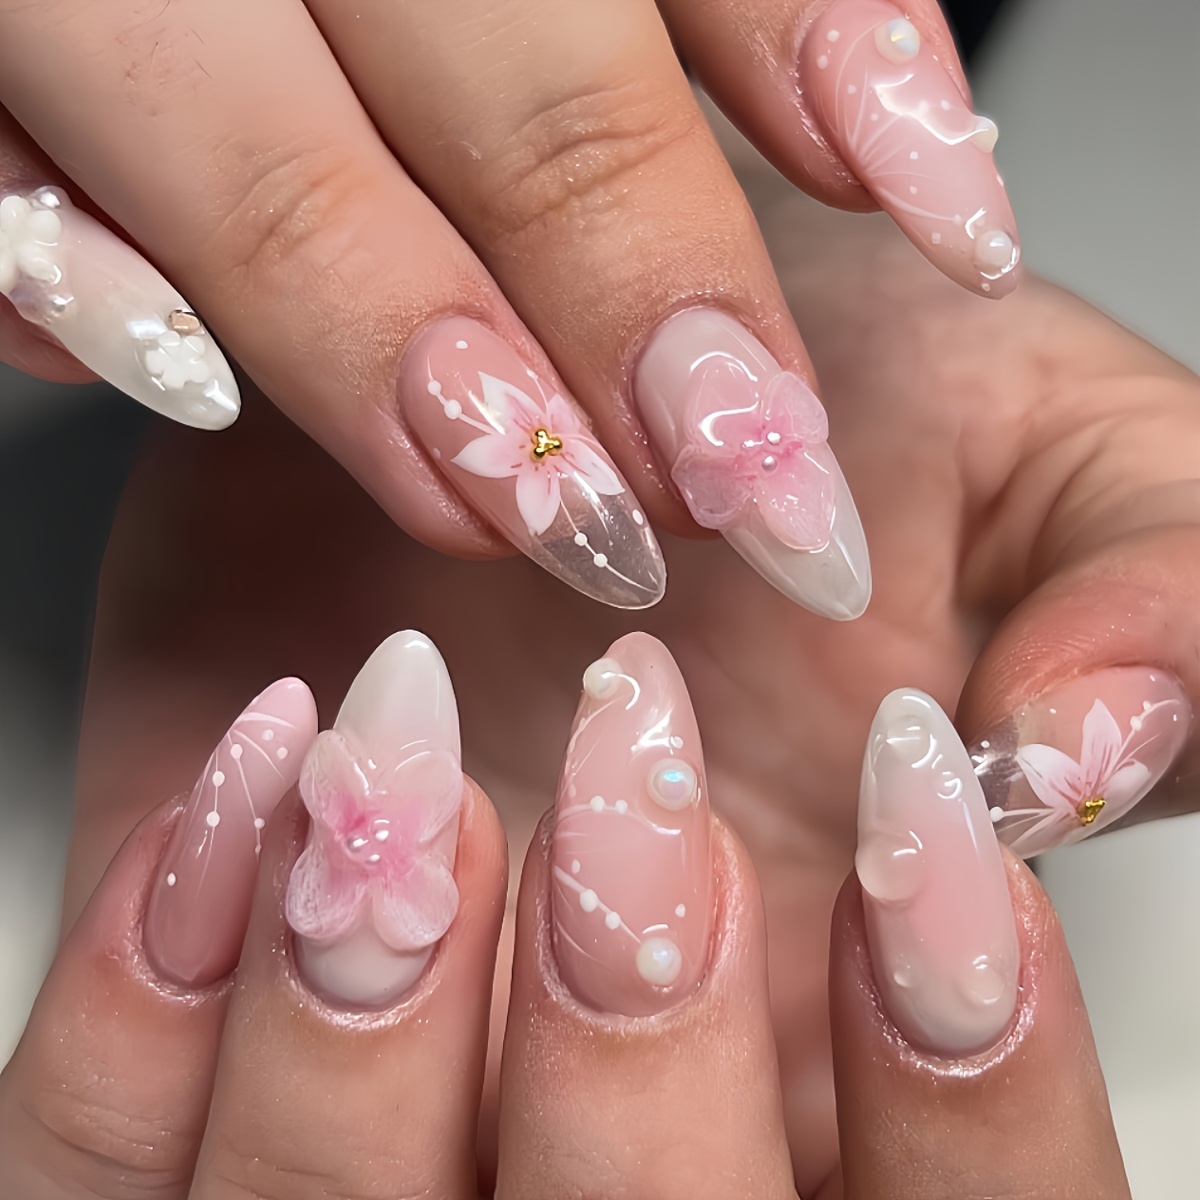 

24-pcs Pink Almond Shaped Nail Set, Middle Length With Flower Pattern And Glossy Finish, Fashionable Press-on Nails With Lotus And Pearl Accents For Women – Includes Gel Nail File